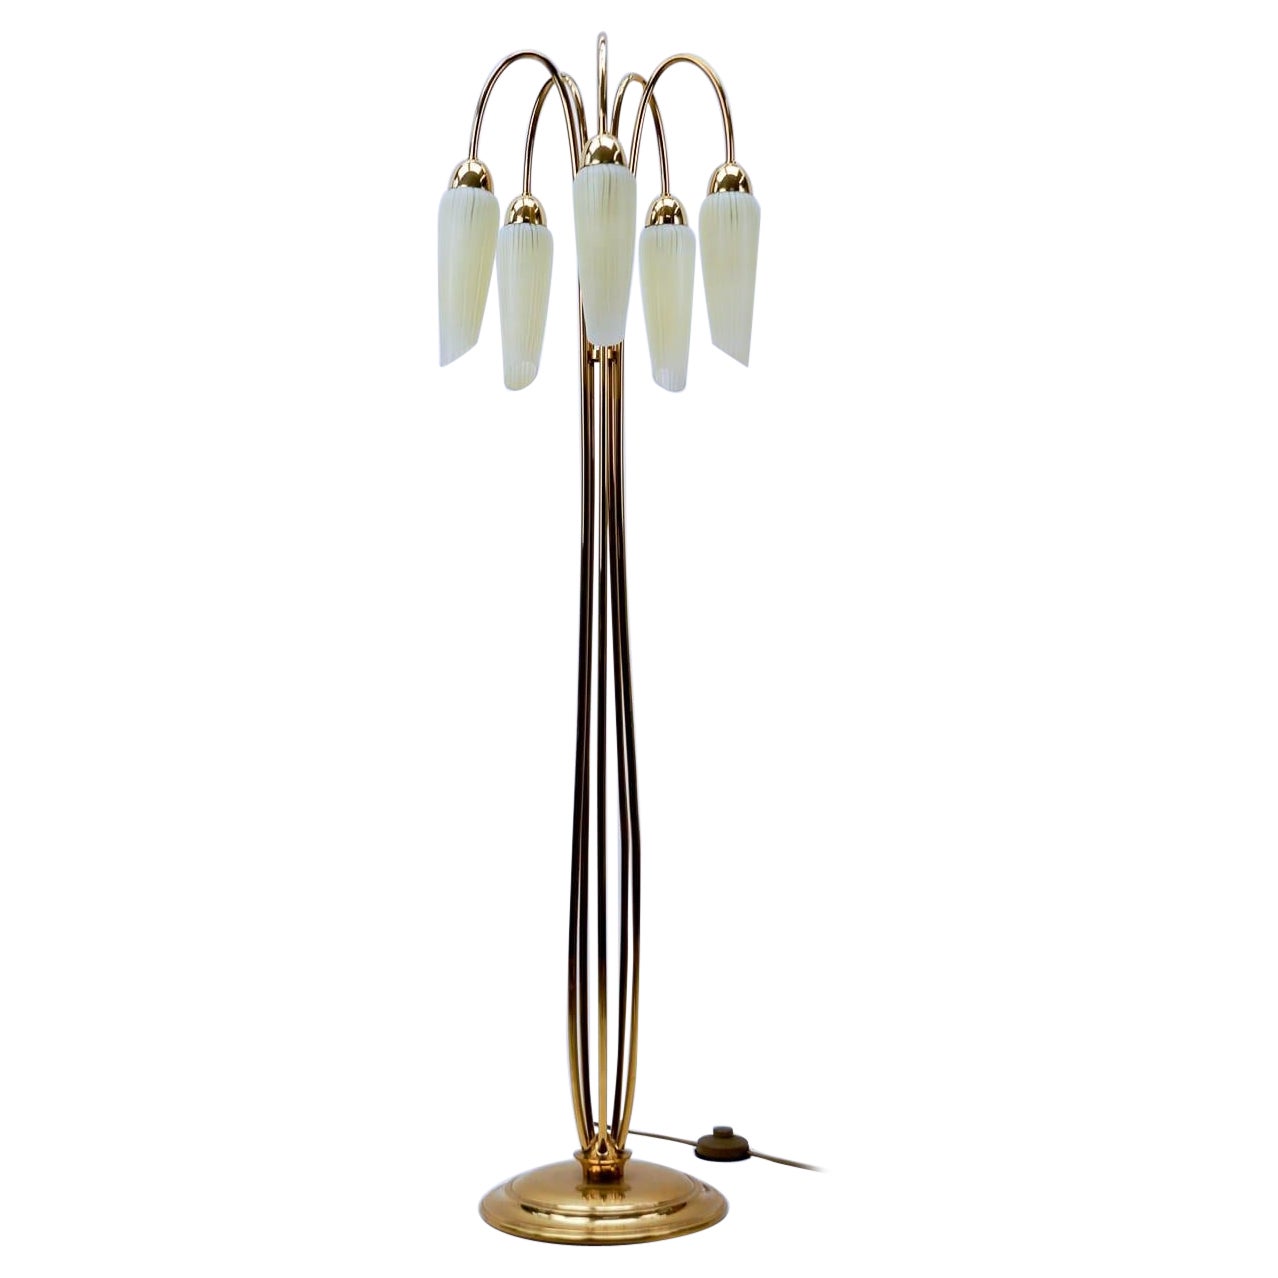 Very Rare Mid-Century Modern Floor Lamp with Five Glass Shades, 1950s Italy For Sale